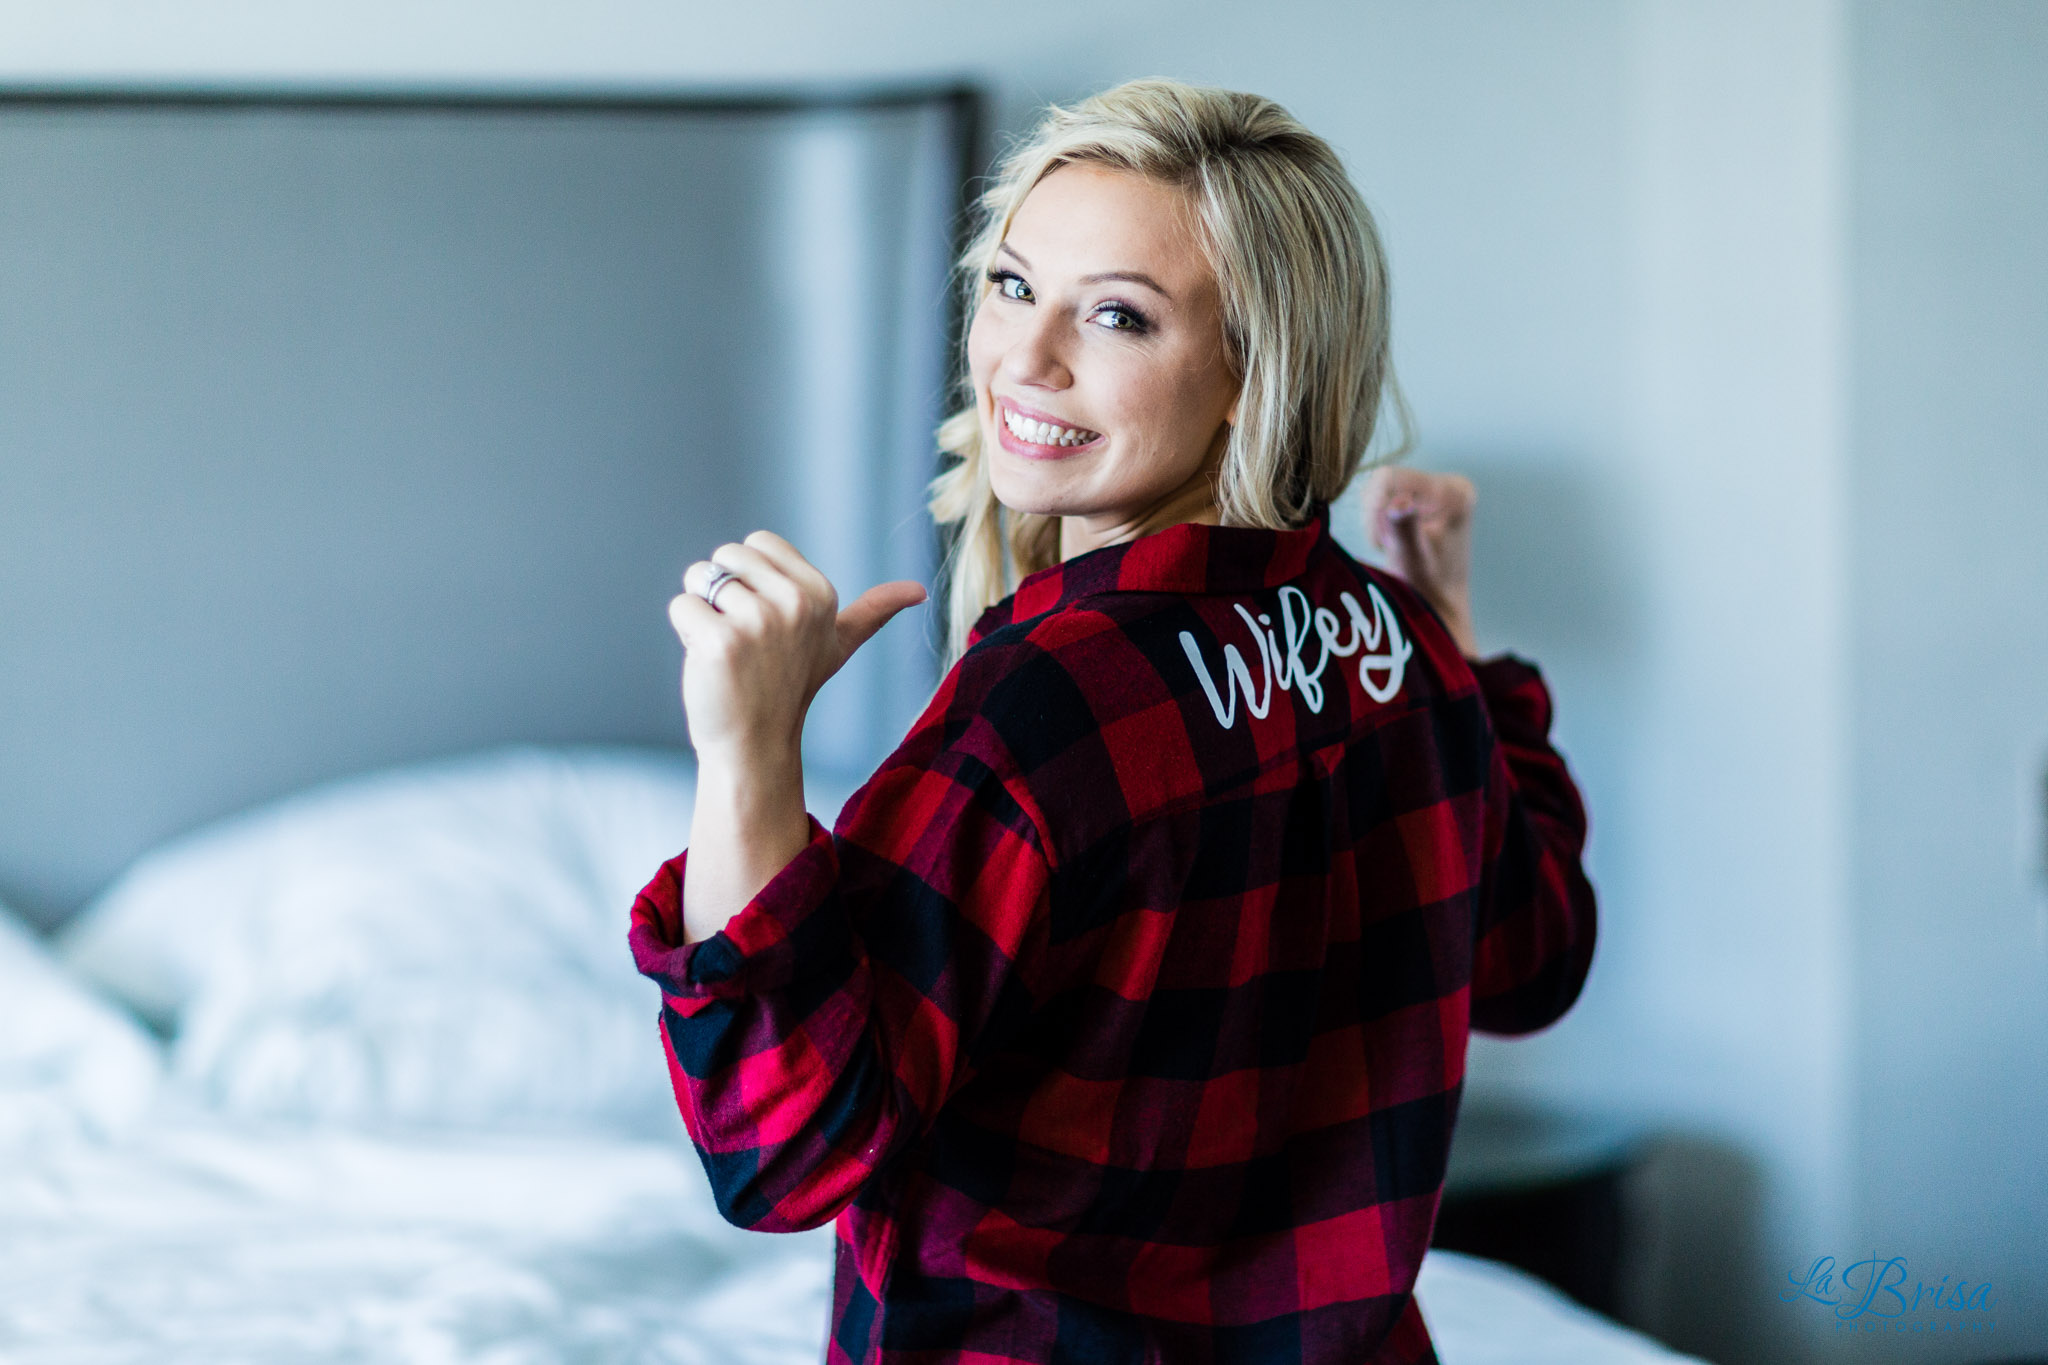 wifey embroidered flannel top